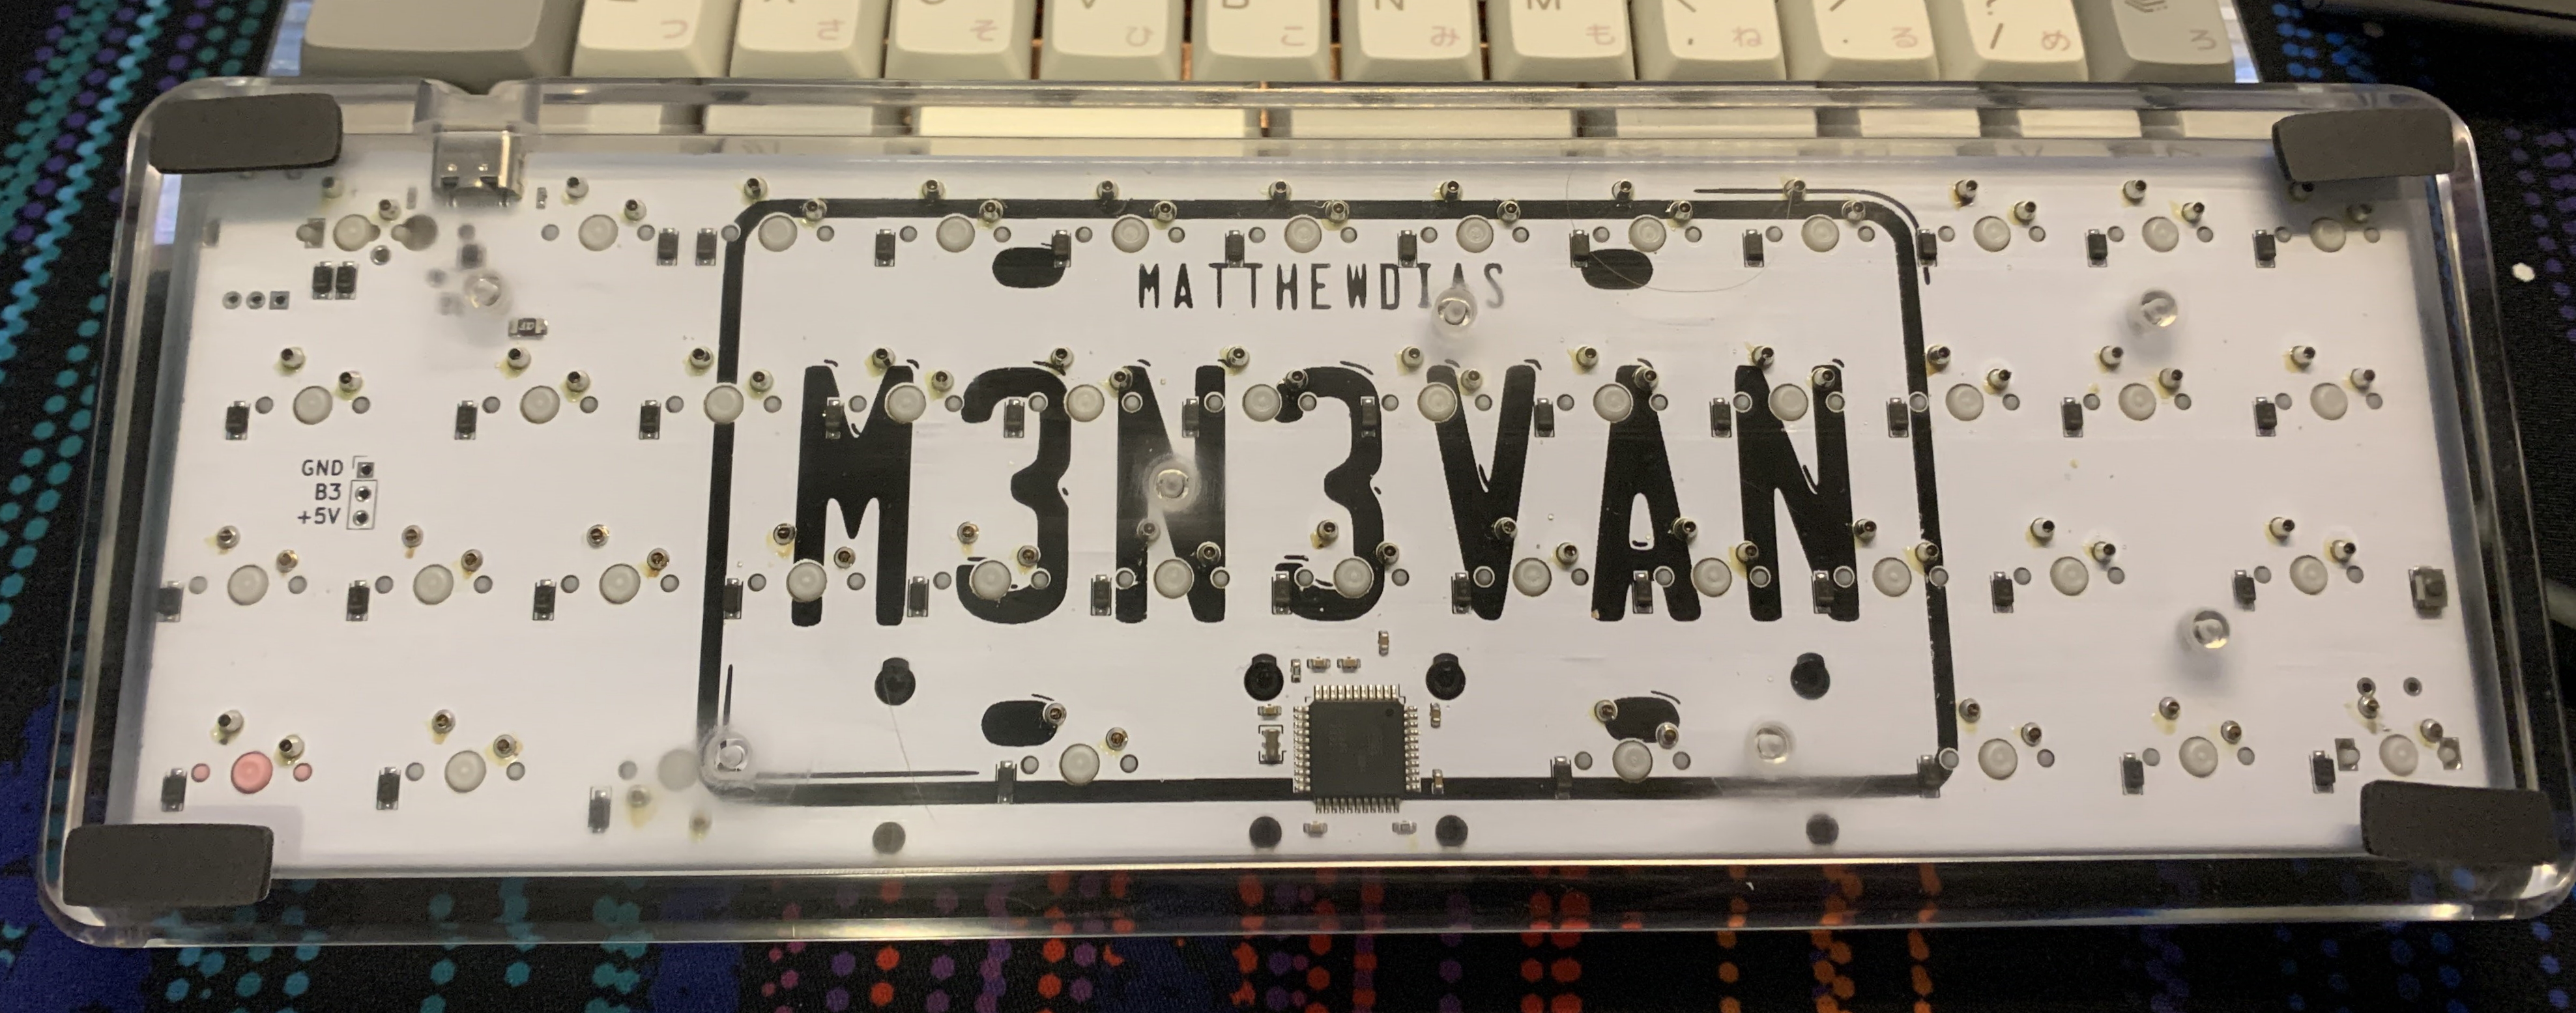 Bottom of a clear acrylic MFR prototype with a m3n3van rev2 PCB